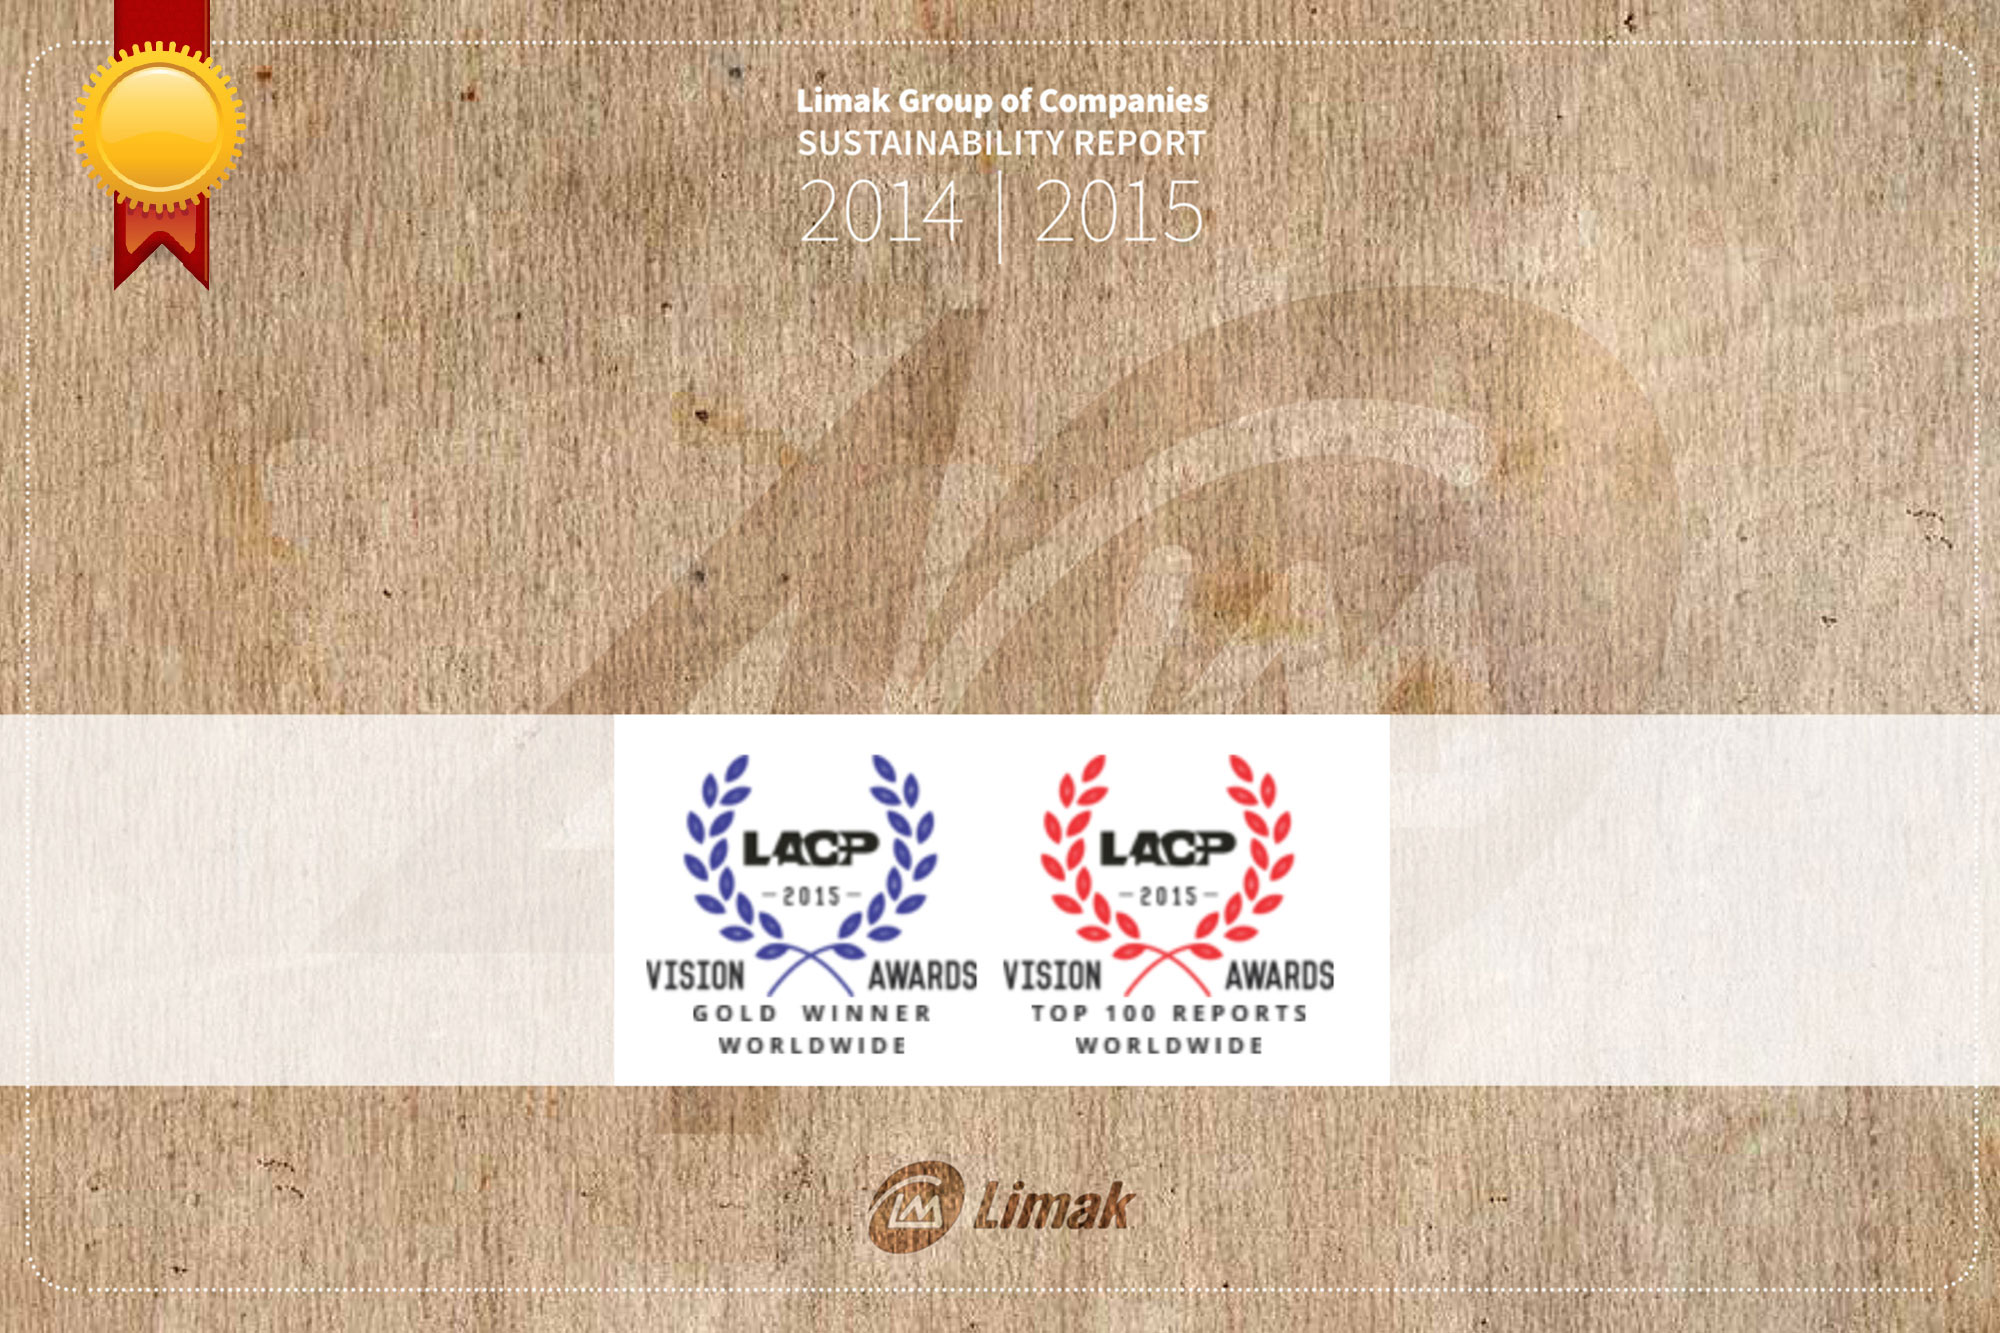 Limak Group of Companies Sustainability Report